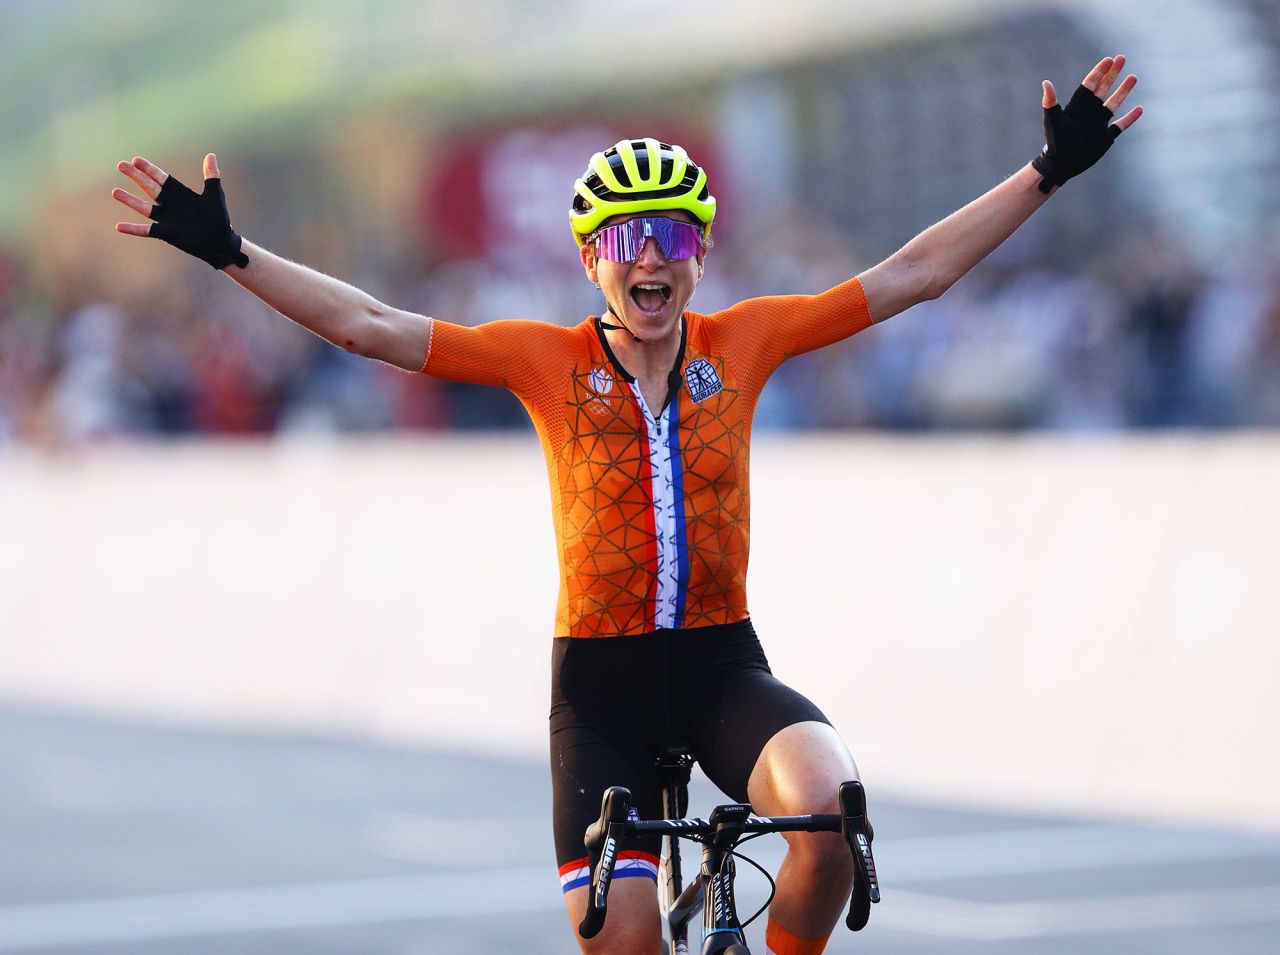 Dutch cyclist Annemiek van Vleuten celebrates after completing the road race on July 25. She <a href="https://www.cnn.com/2021/07/25/sport/anna-kiesenhofer-annemiek-van-vleuten-tokyo-2020-spt-intl/index.html" target="_blank">thought she had won</a> the gold medal, not realizing that Austria's Anna Kiesenhofer had broken away from the pack and finished first. Cyclists race without earpieces at the Olympics, and that played a part in her confusion, she said. But she was still "really proud" of her silver medal.